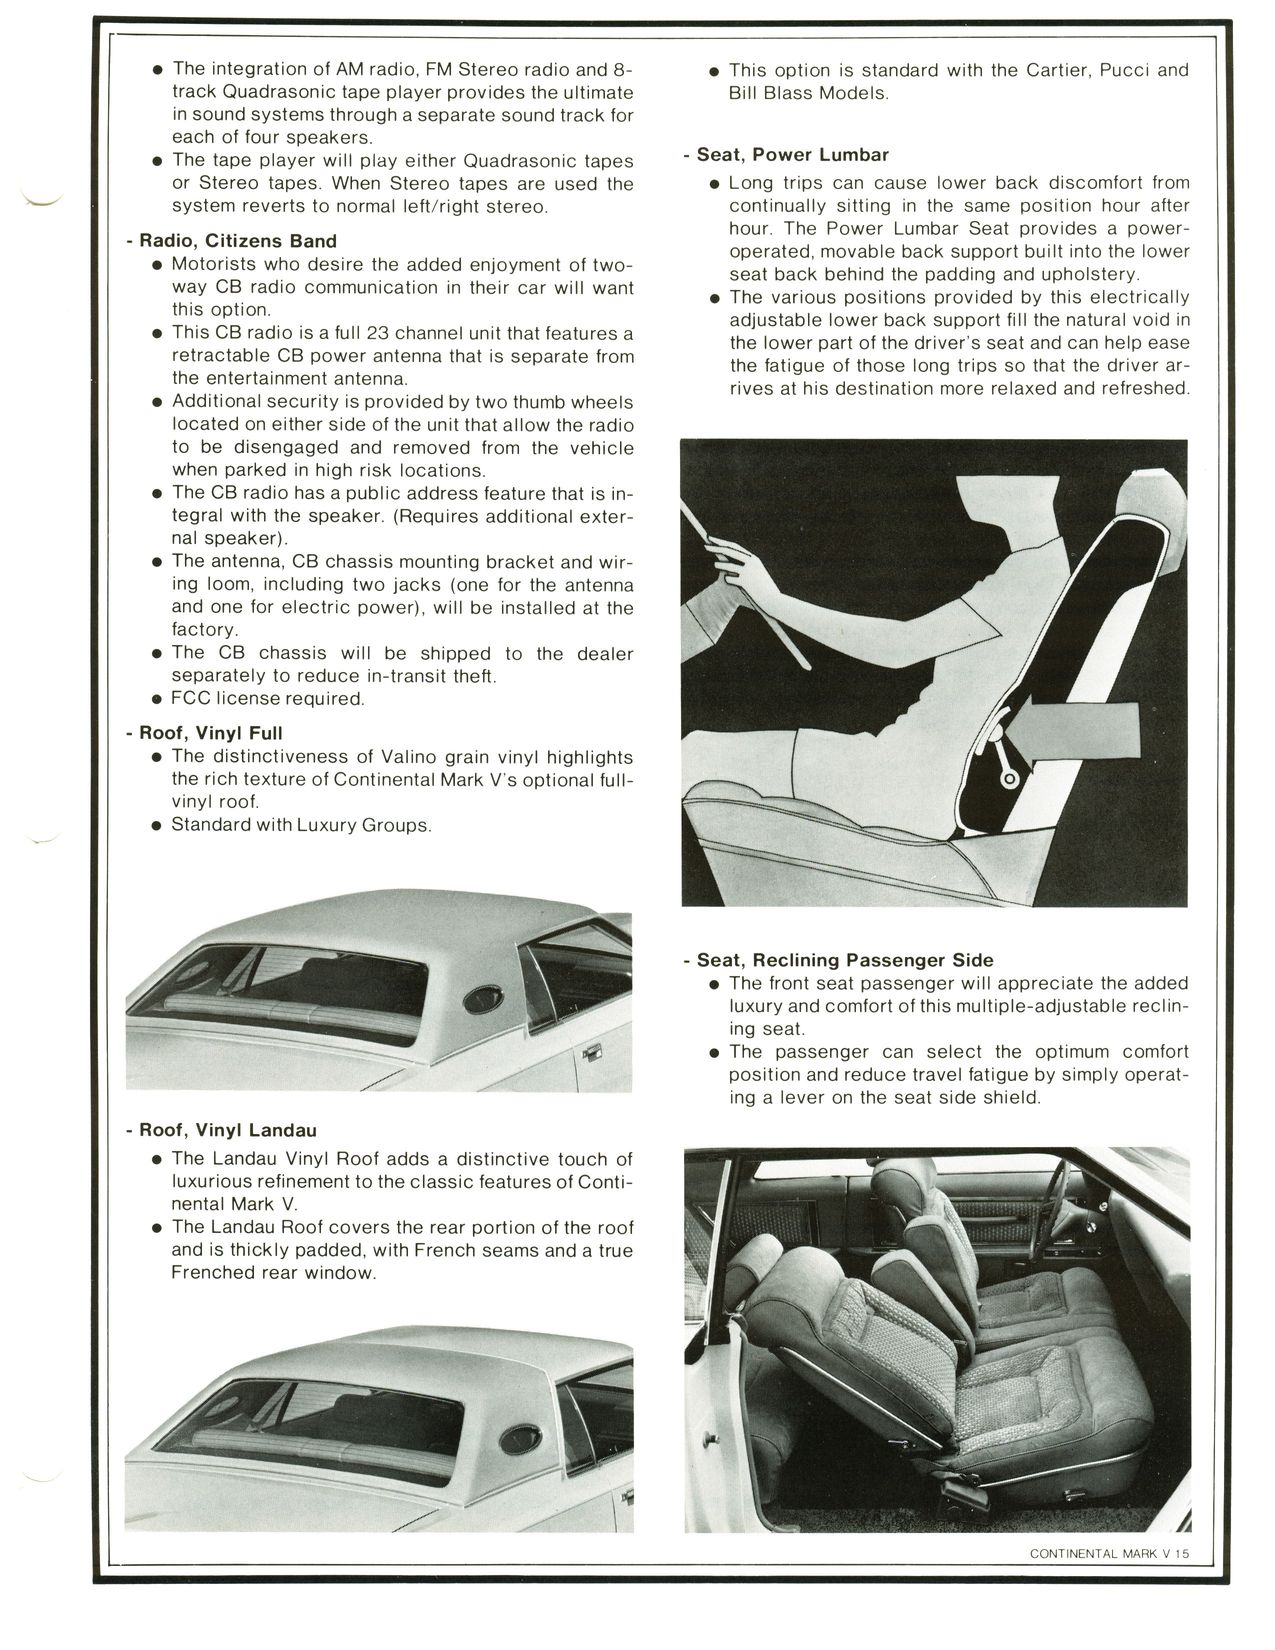 1977 Continental Product Facts Book-1-15